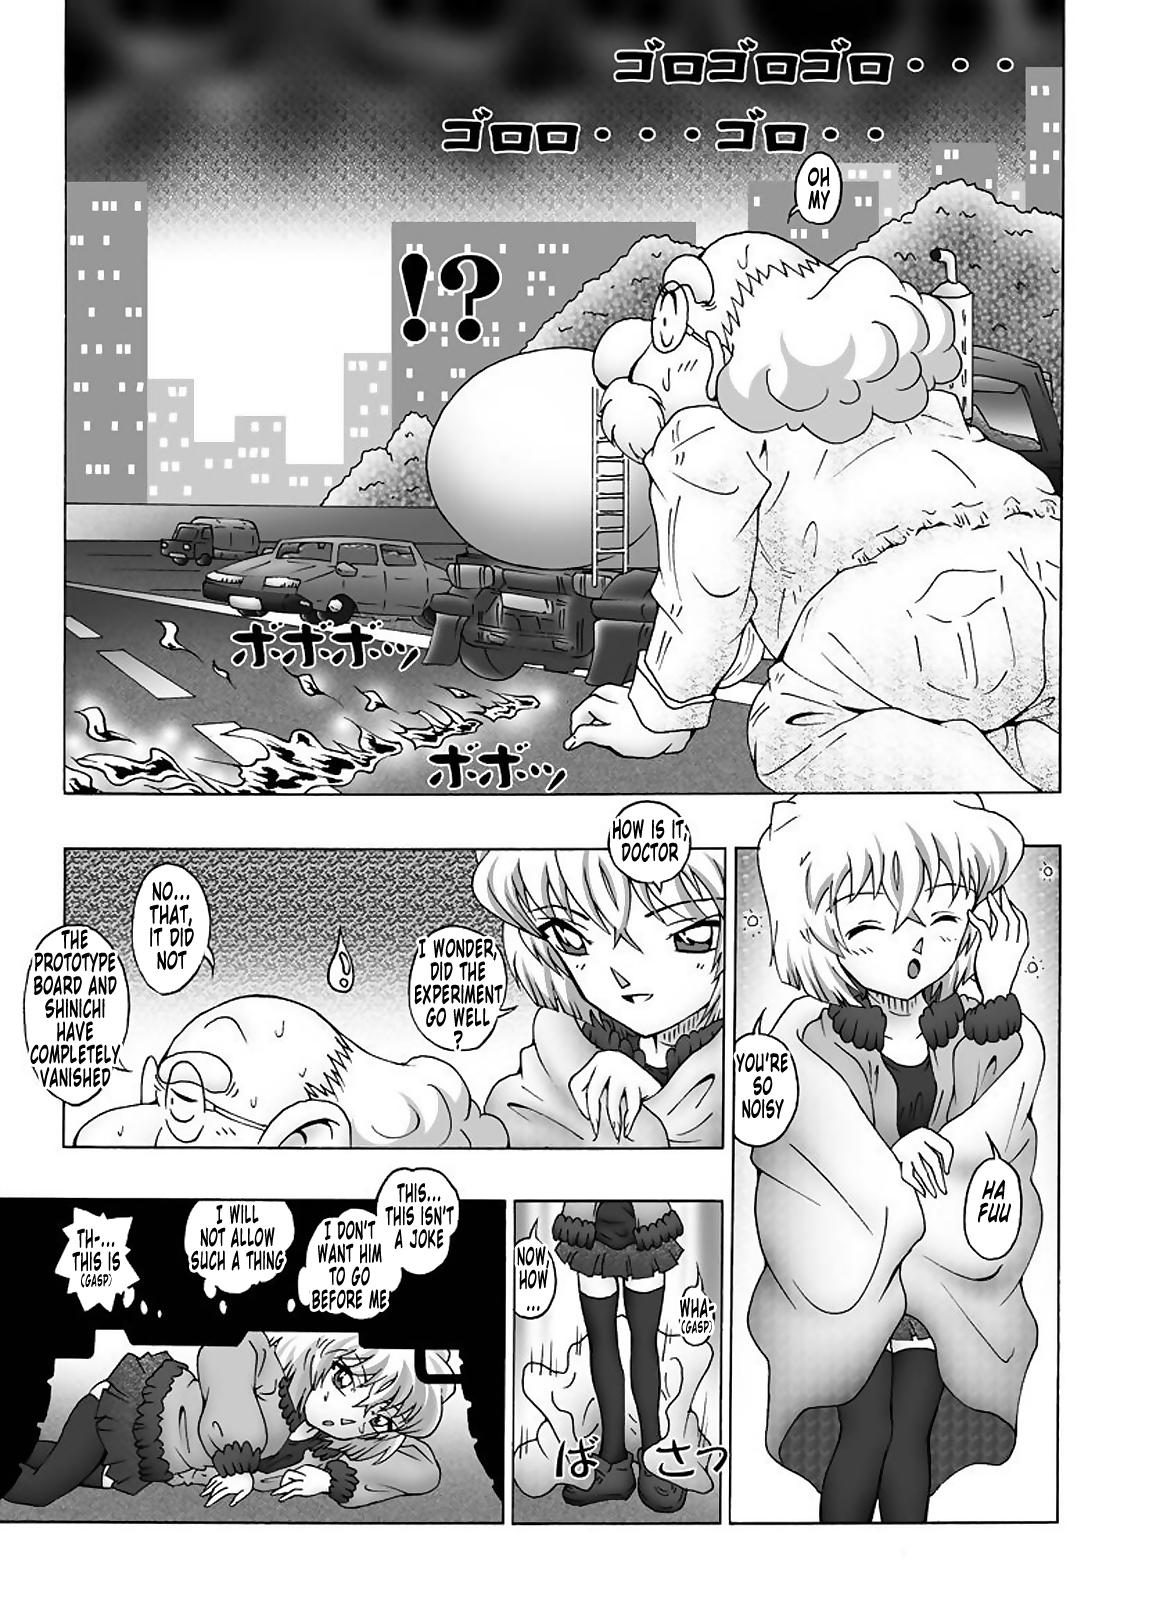 Virginity Bumbling Detective Conan - File 12: The Case of Back To The Future - Detective conan Porn Amateur - Page 6